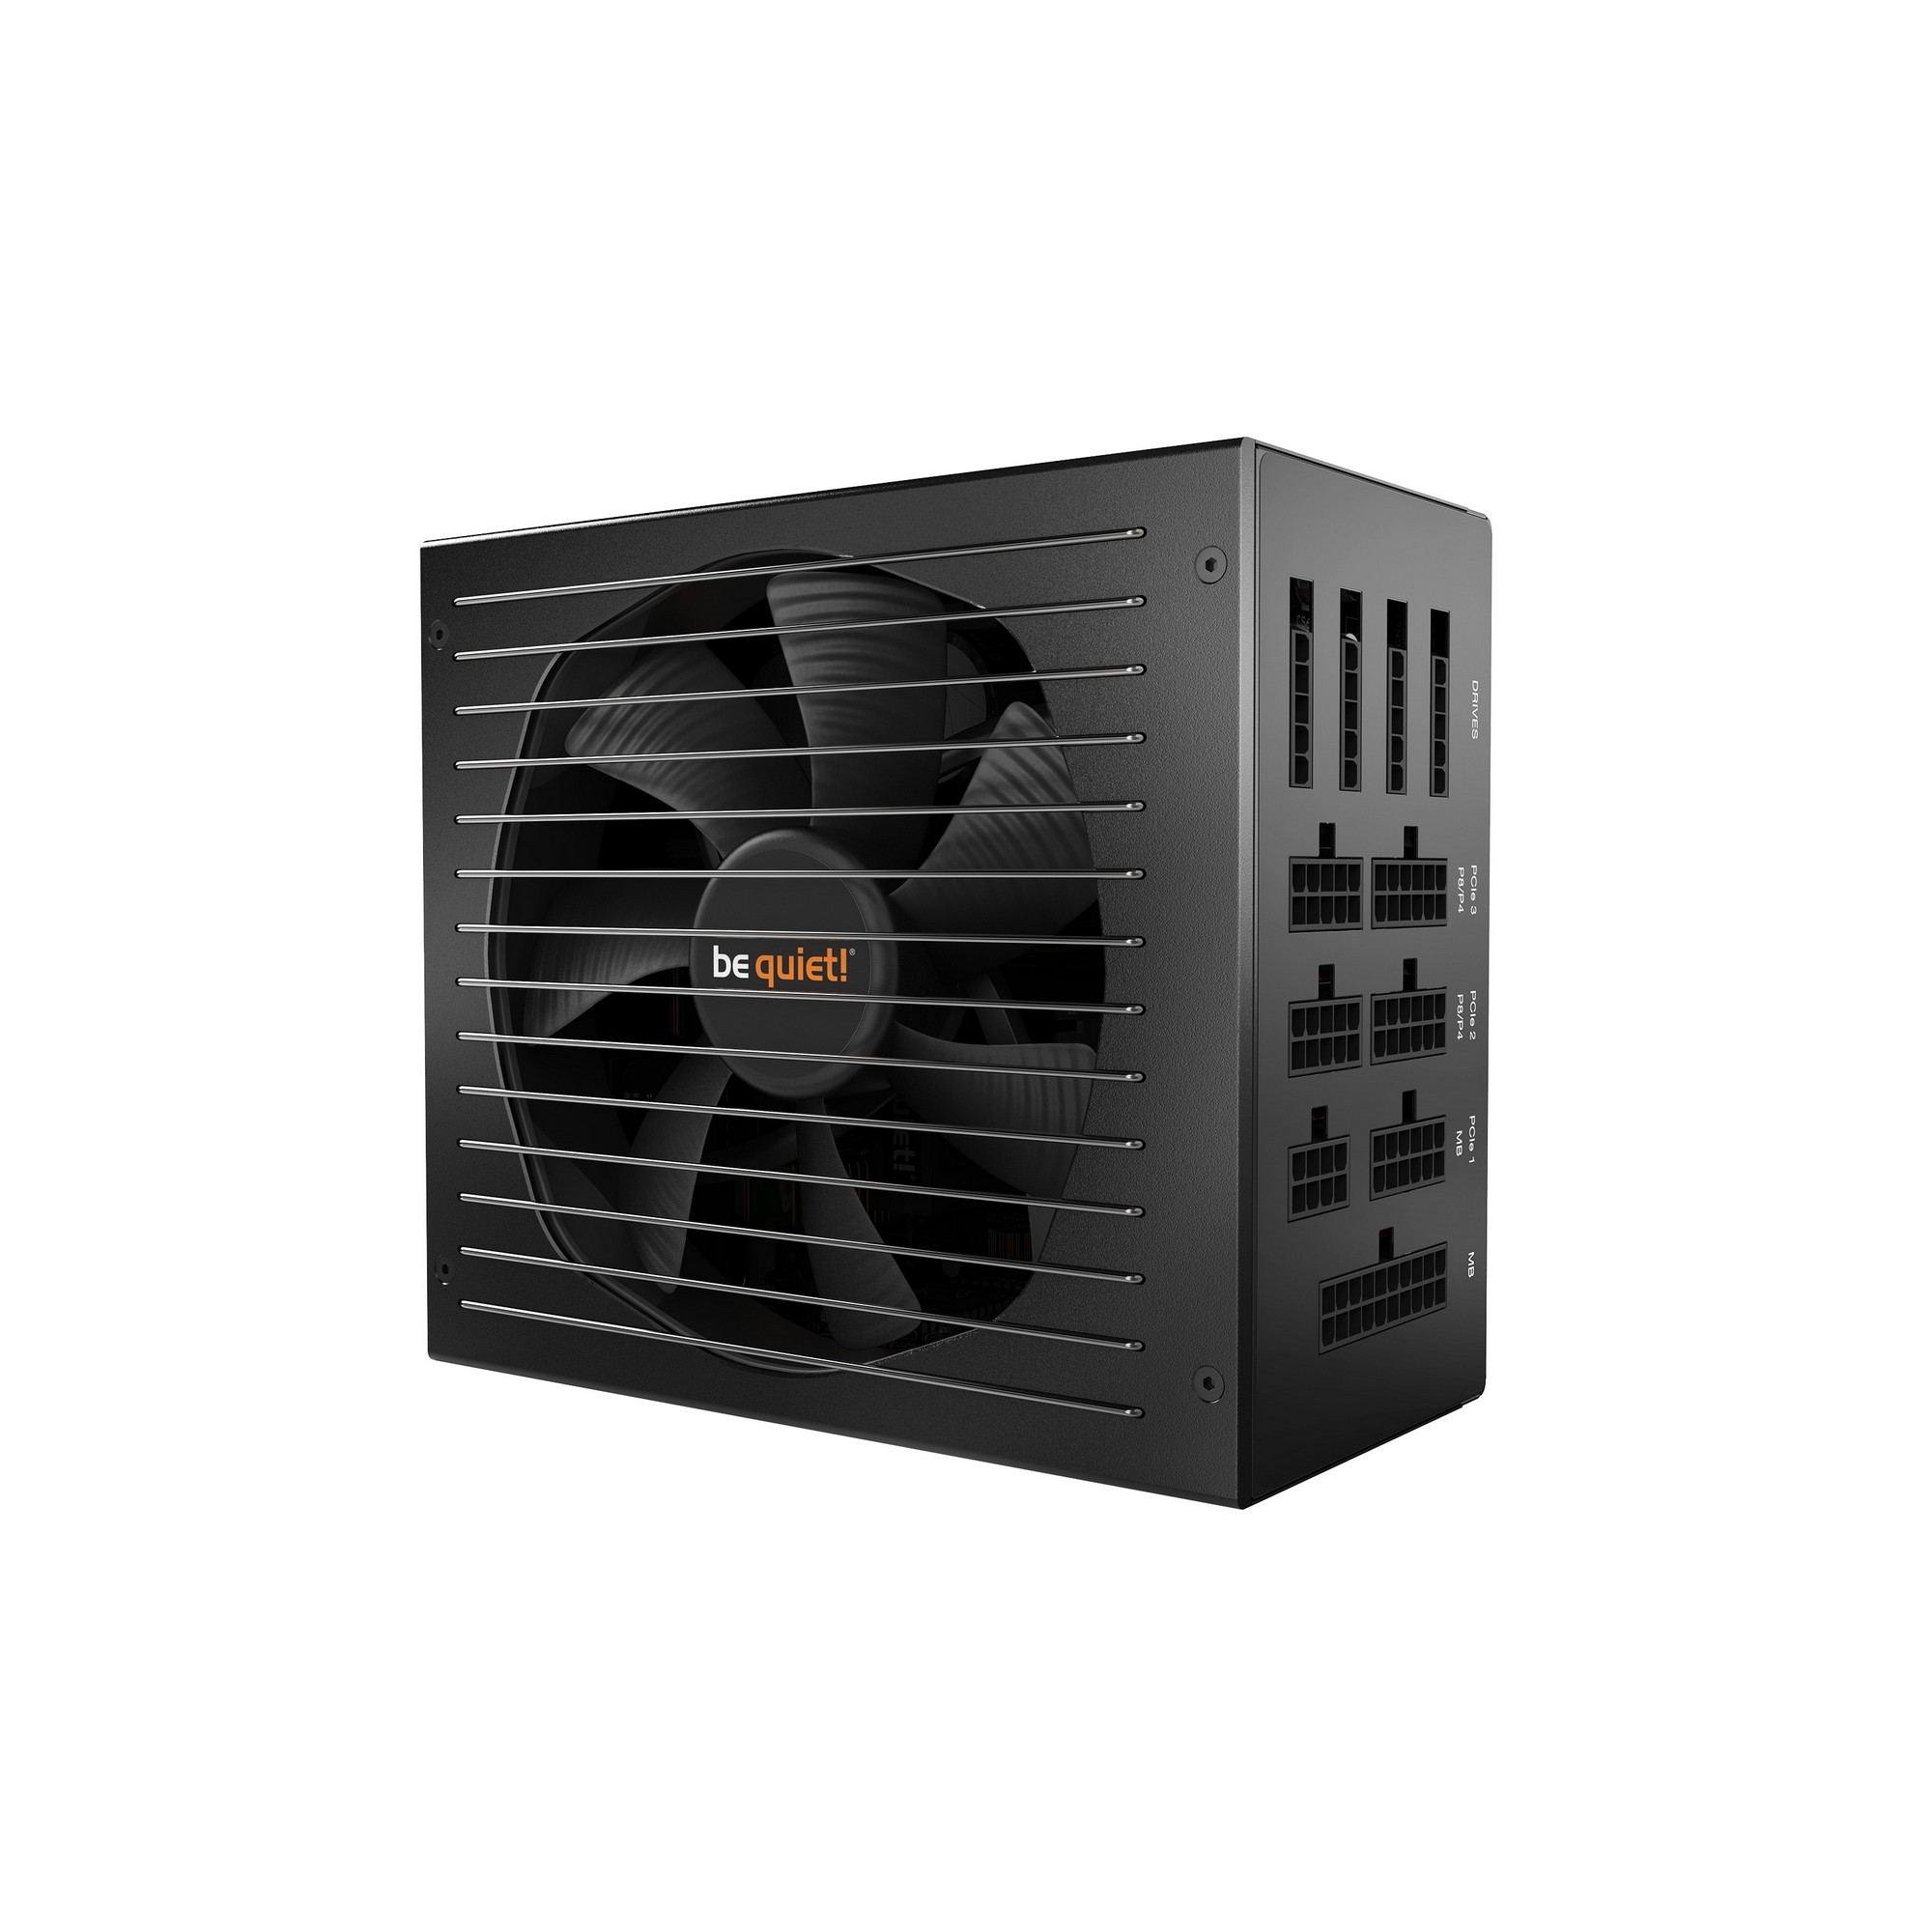 be quiet! - be quiet! Straight Power 11 750W 80 Plus Gold Modular Power Supply